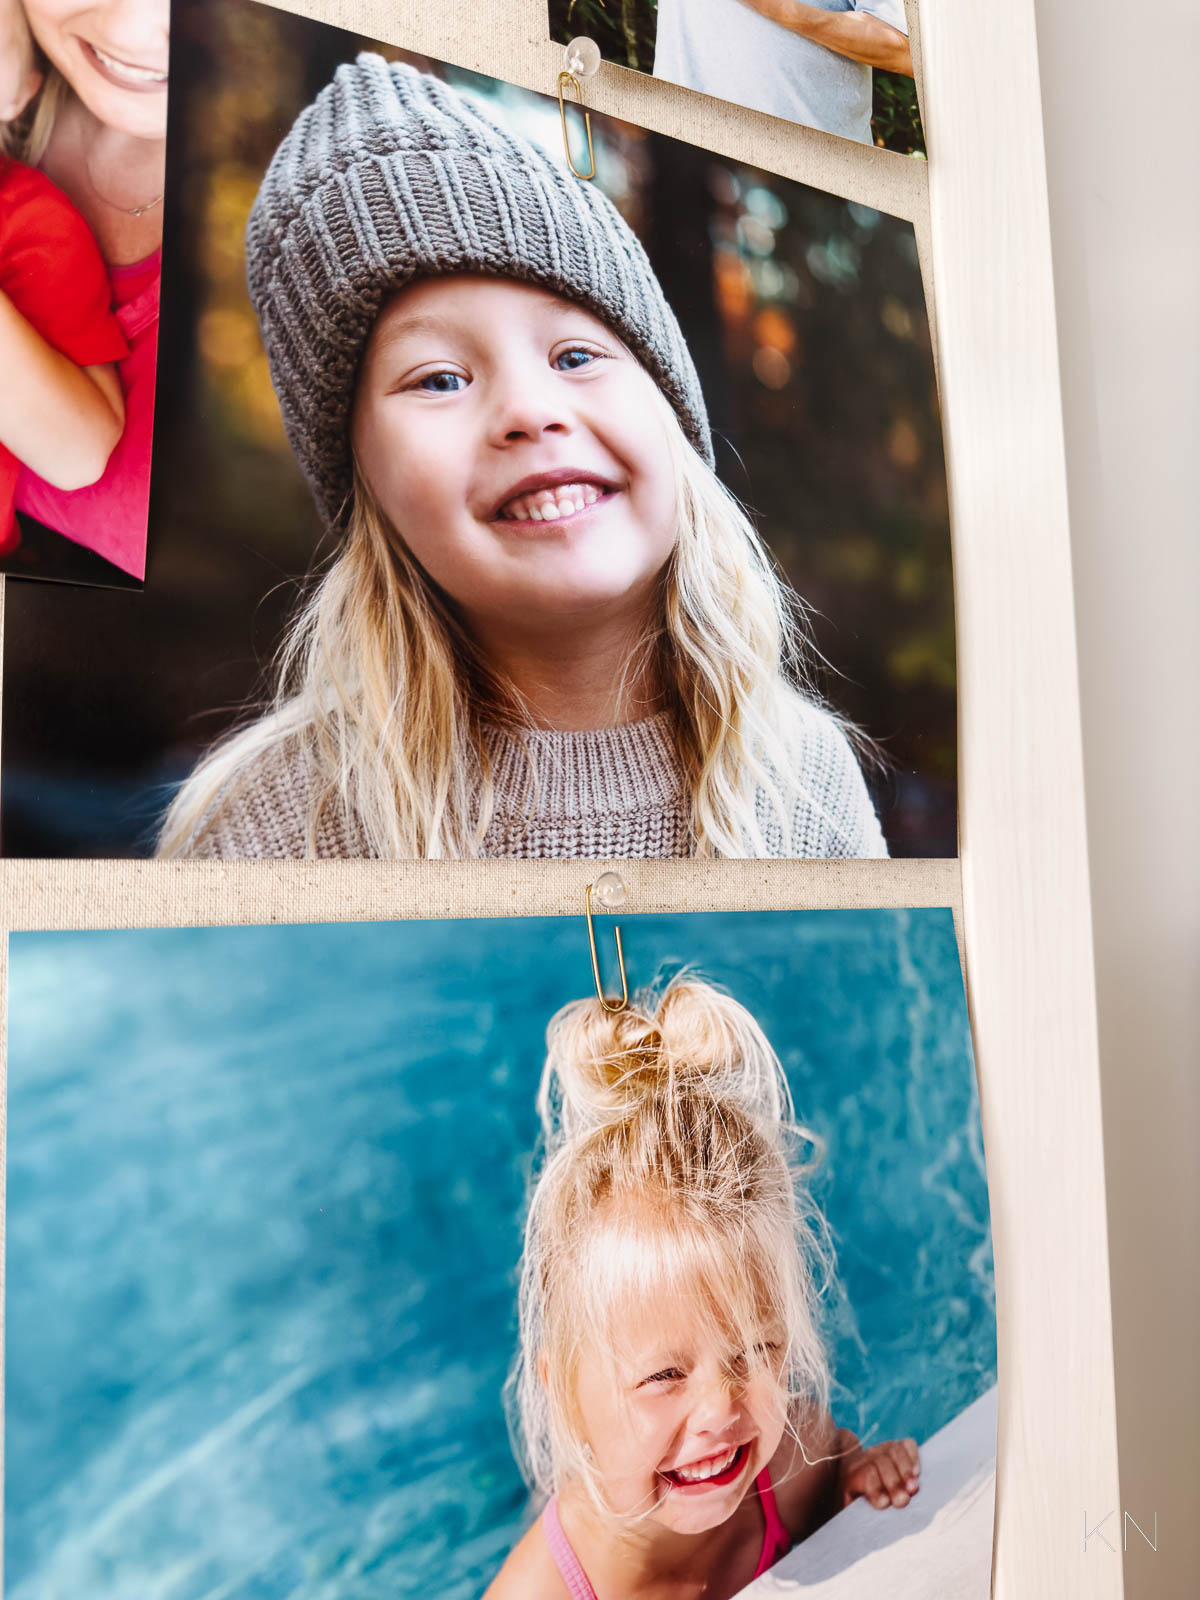 How to Hang Photos & Art On a Pinboard Without Holes